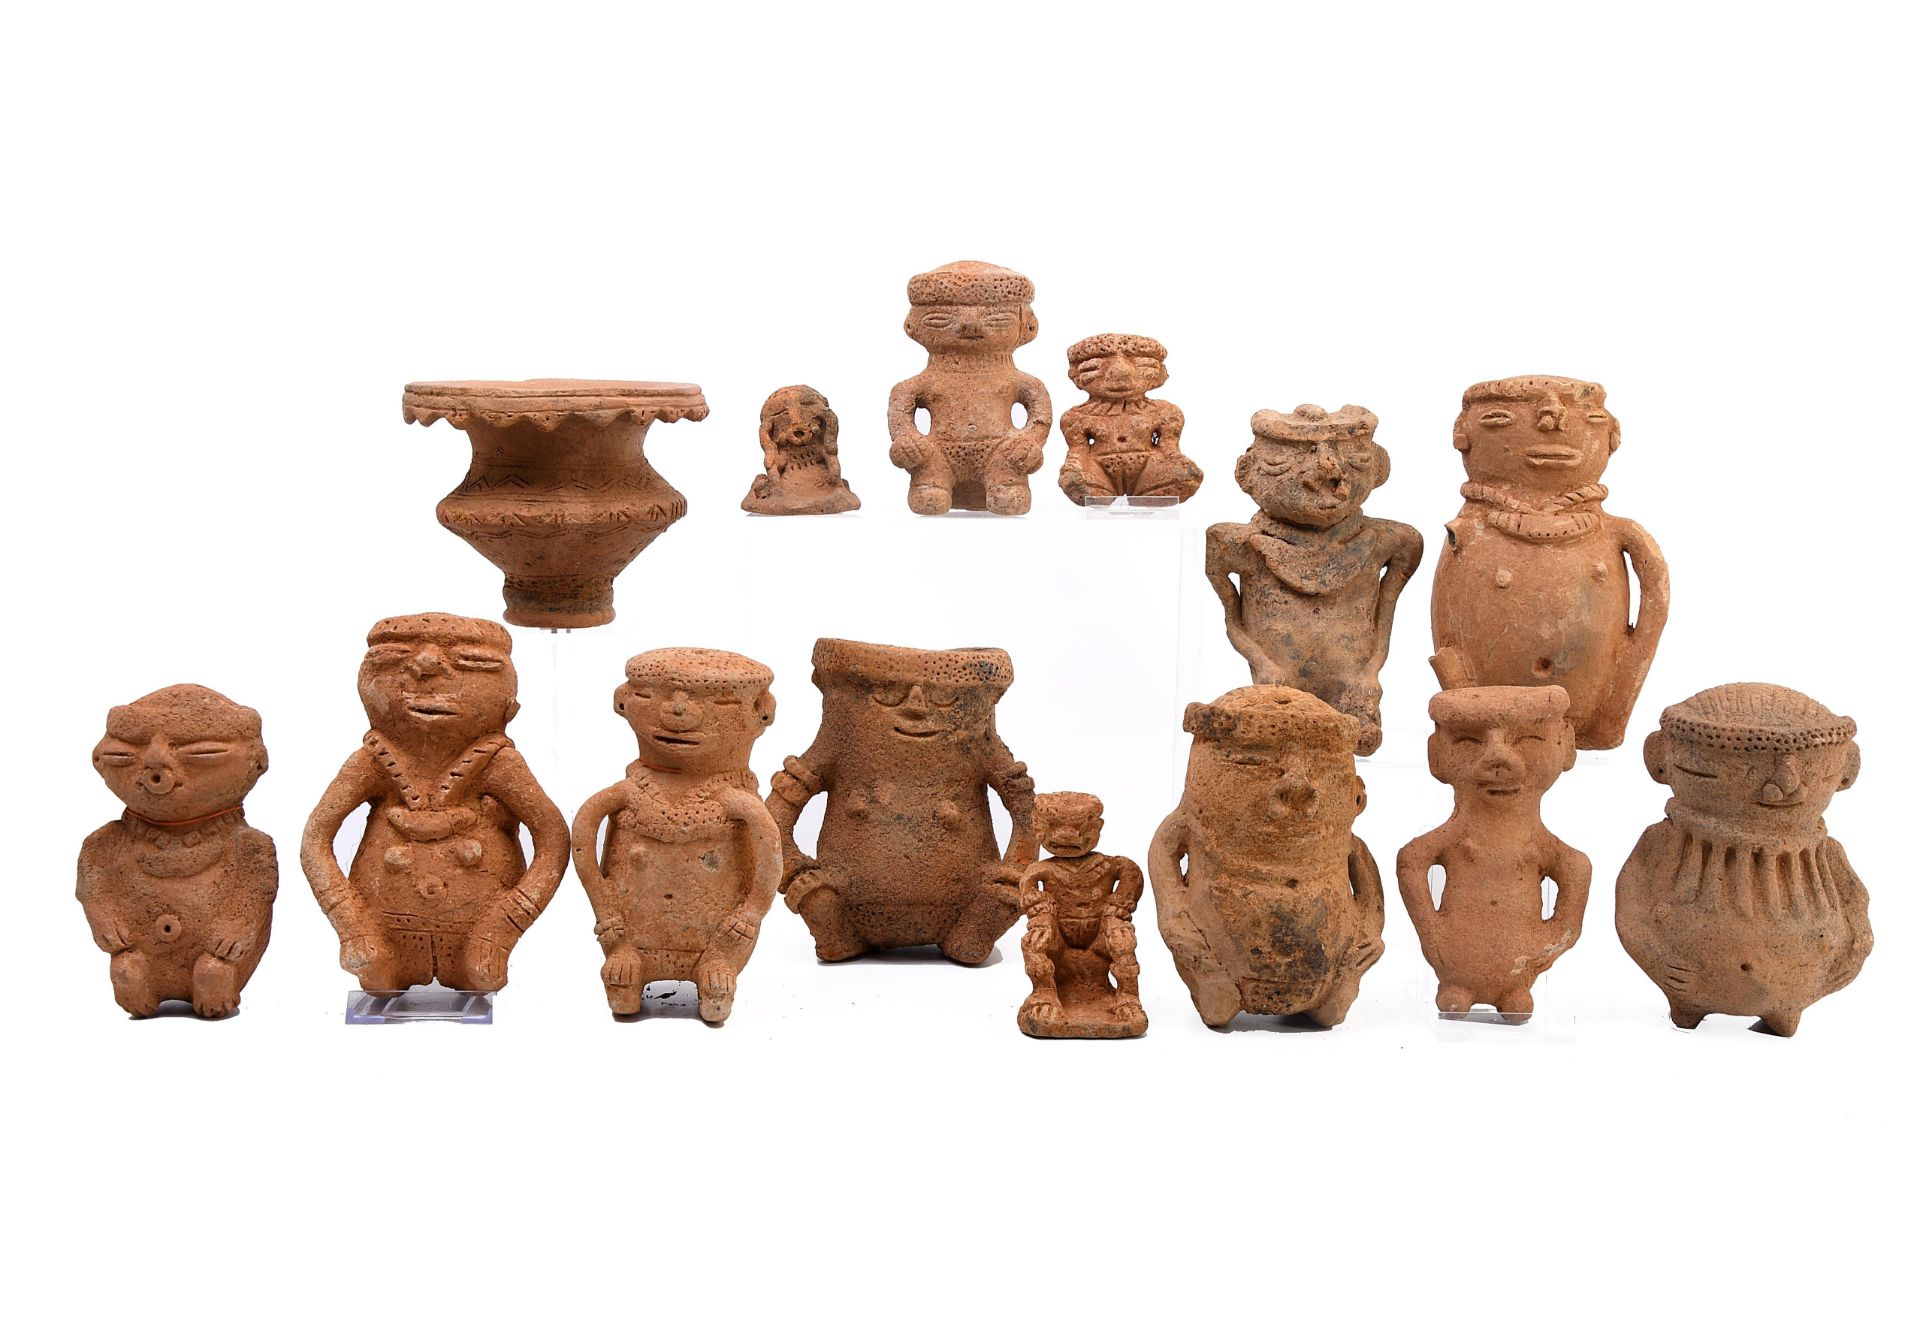 Colombia, Sinu region, a collection of fourteen various terracotta figures, ca. 1200-1400 AD.